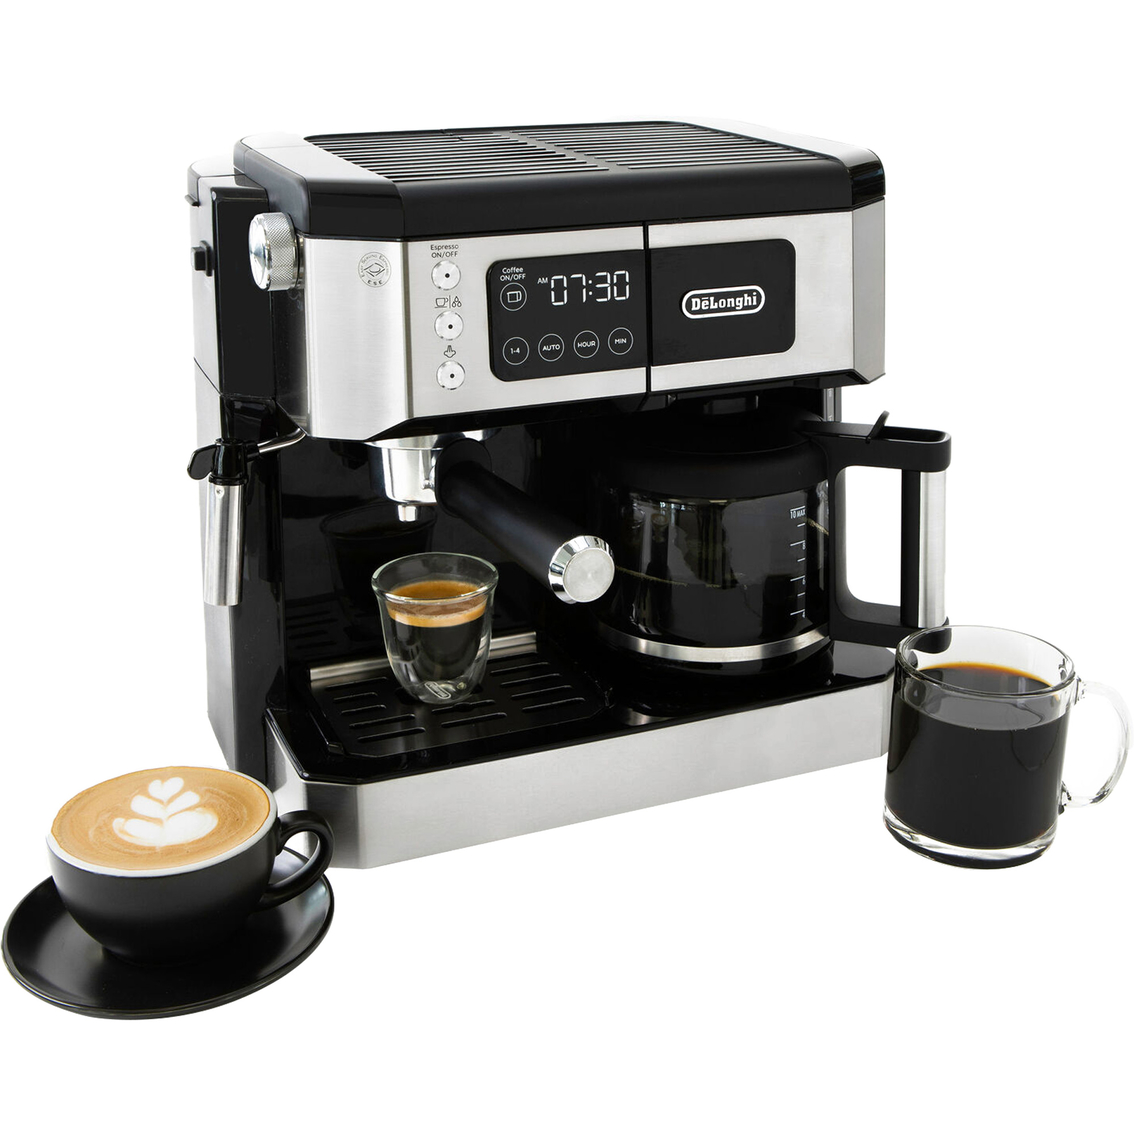 De'Longhi All-In-One Combination Coffee and Espresso Machine - Image 2 of 6